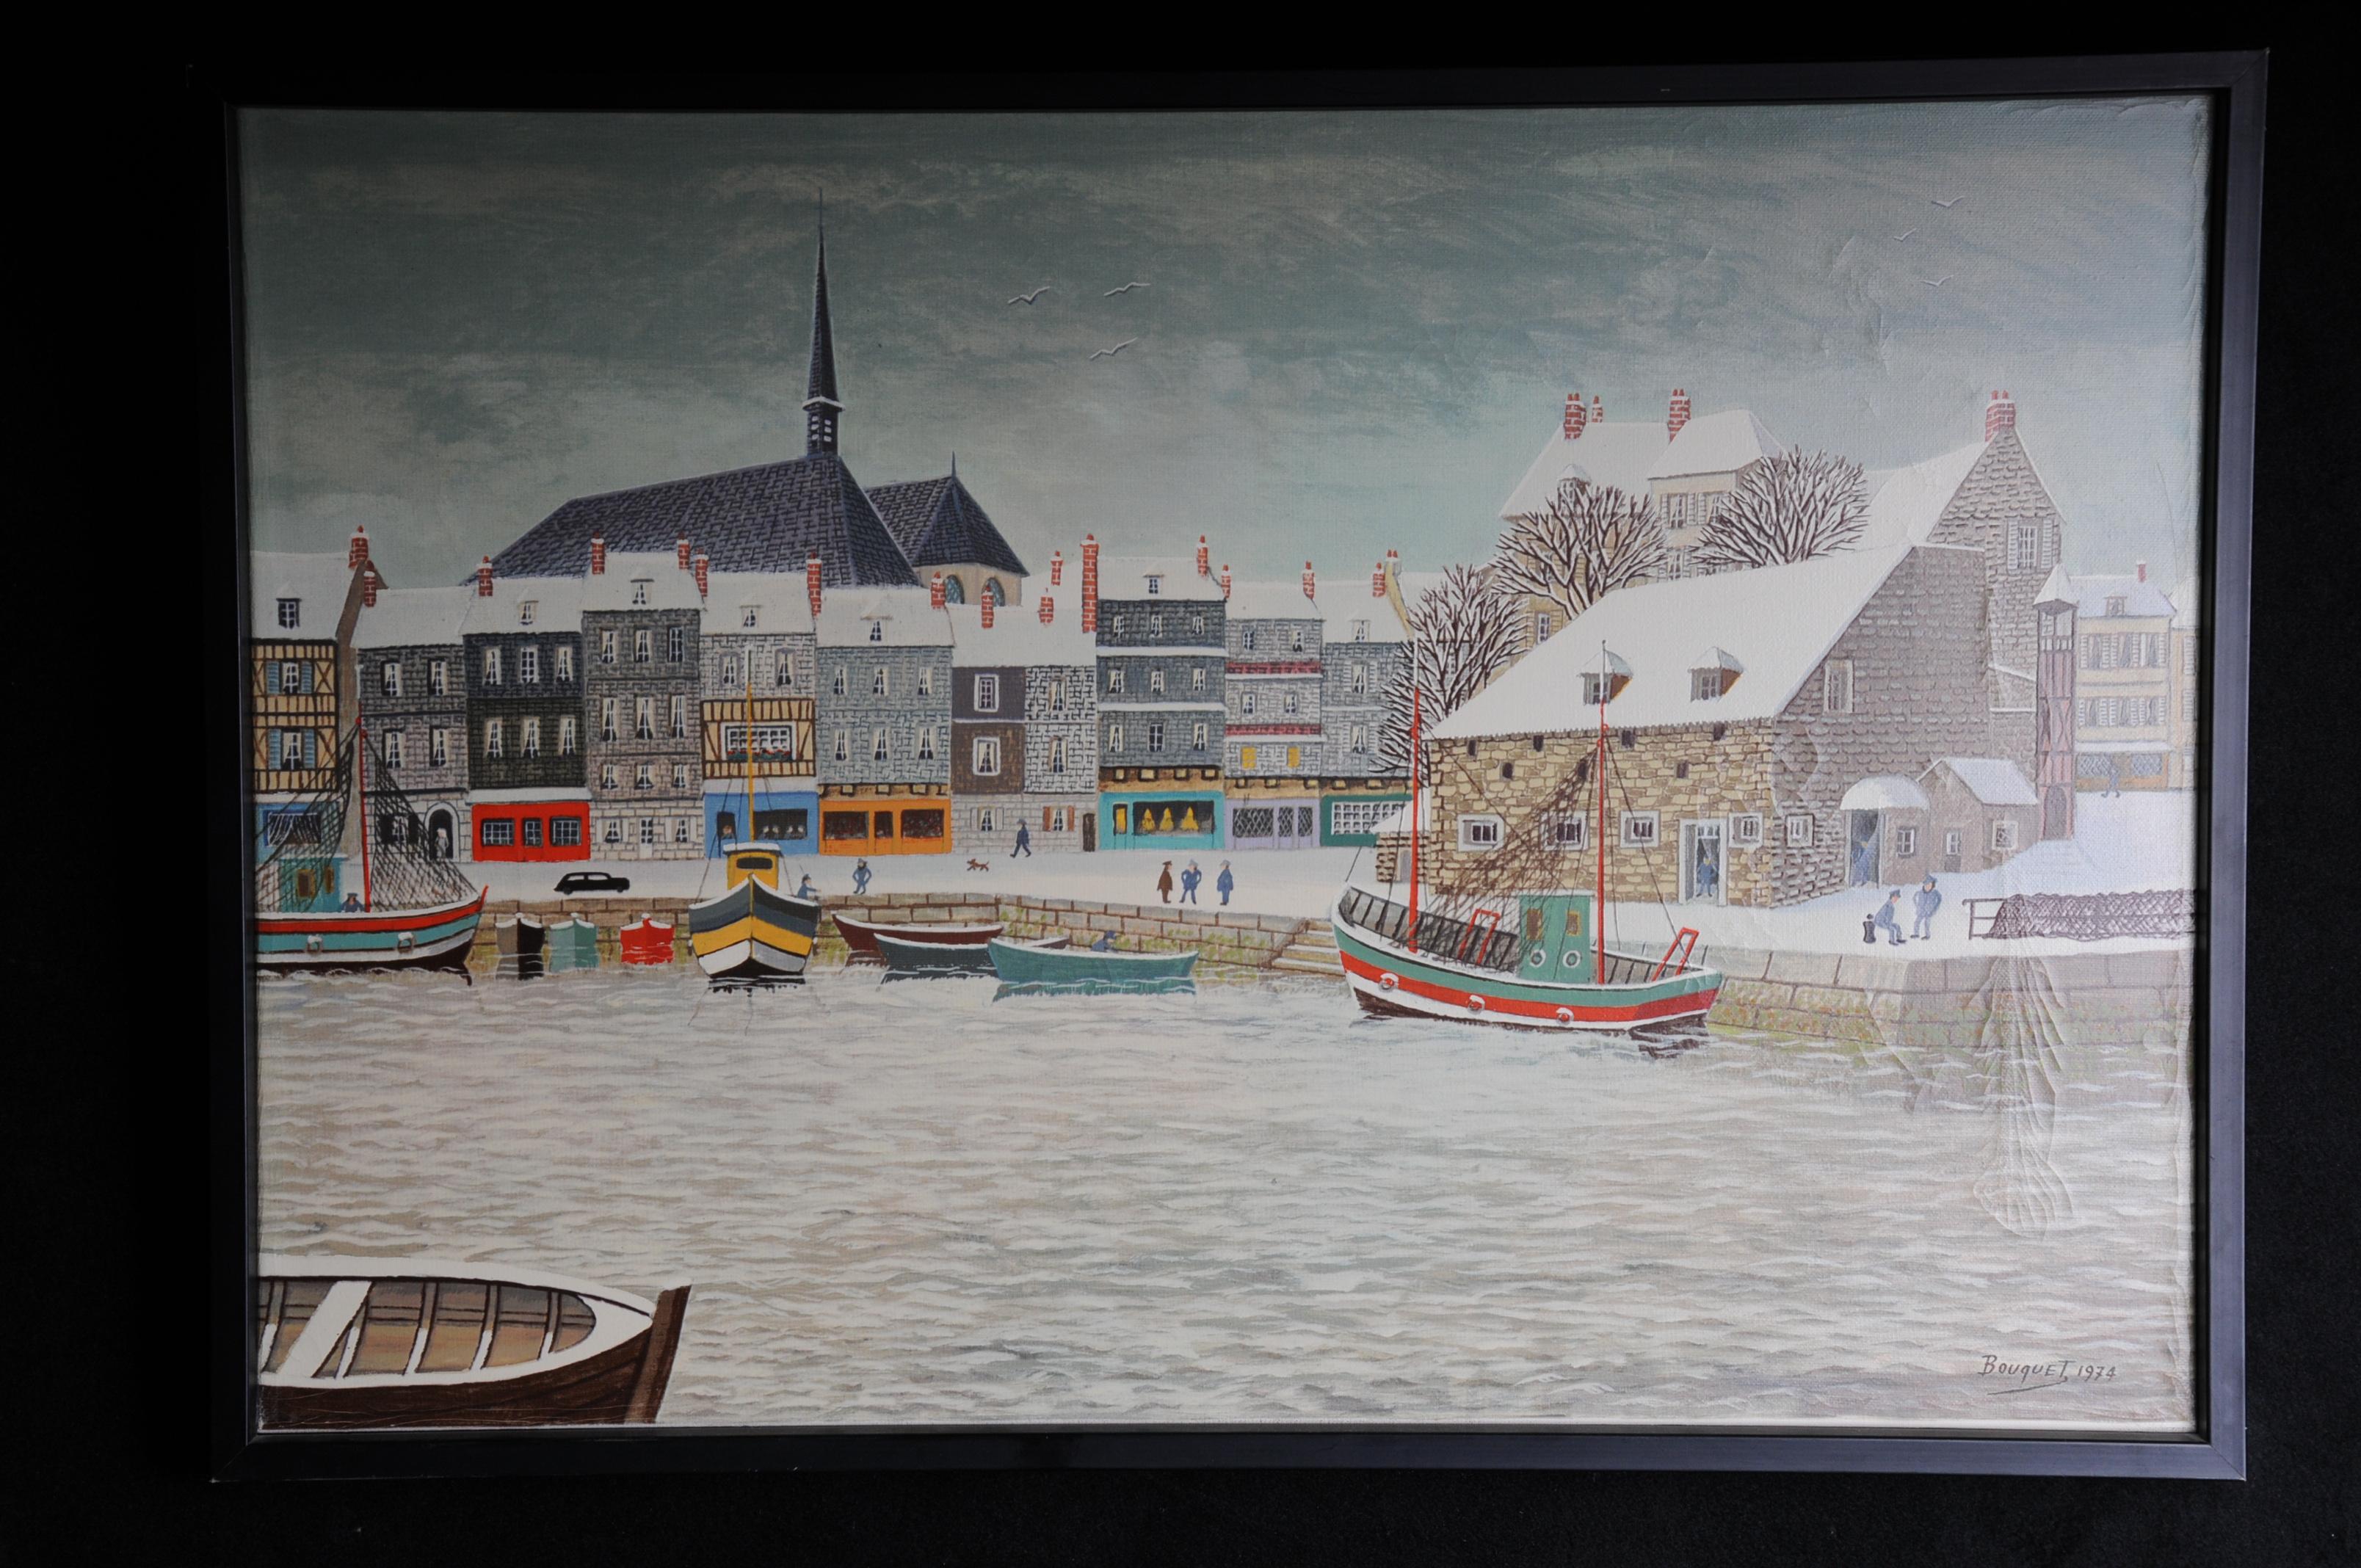 Oil painting by André Bouquet harbor in winter

Painted oil on canvas. View of a French port city with fishing and paddle boats.
André Bouquet (1897-1987) French painter. With black stretcher

(S-233).